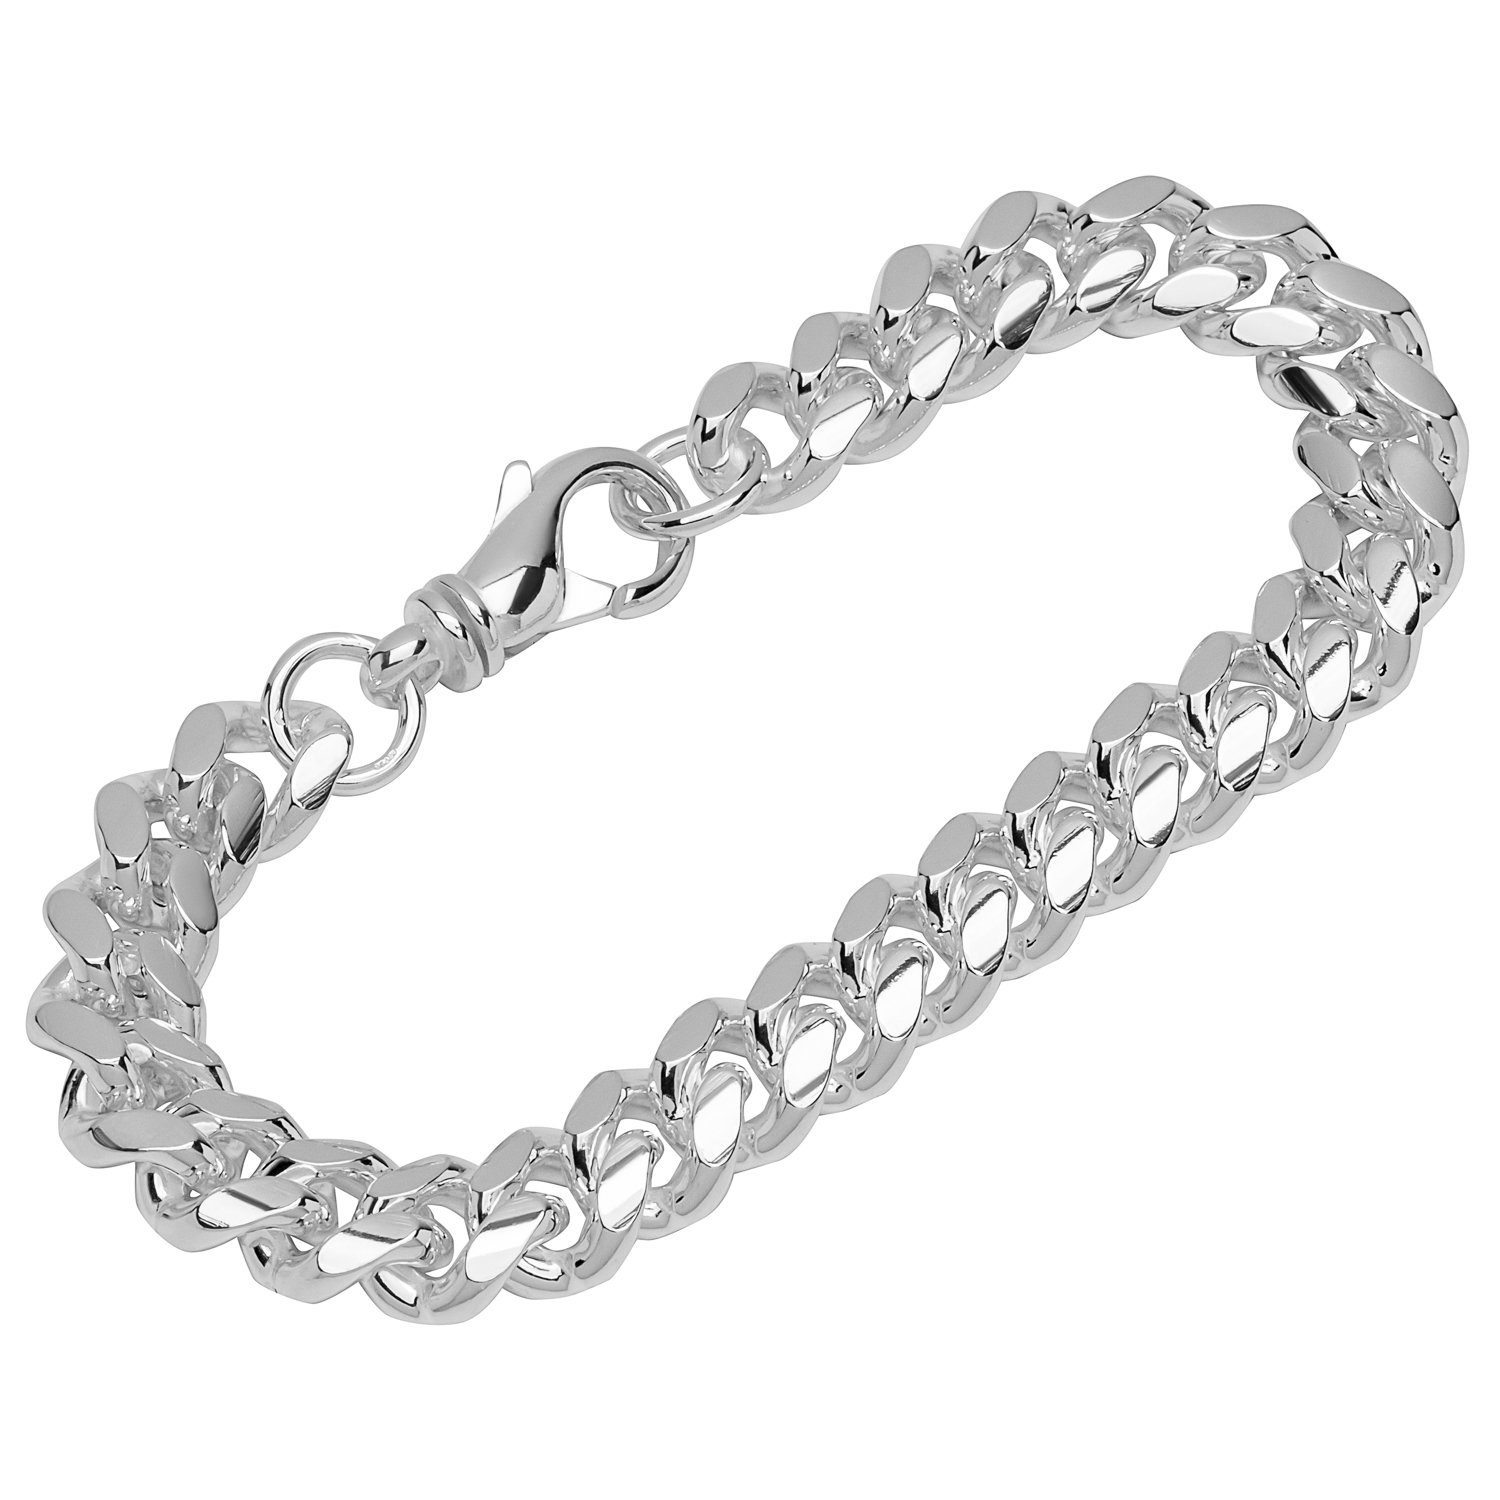 NKlaus Silberarmband Armband 925 Sterling Silber 22cm Panzerkette oval (1 Stück), Made in Germany